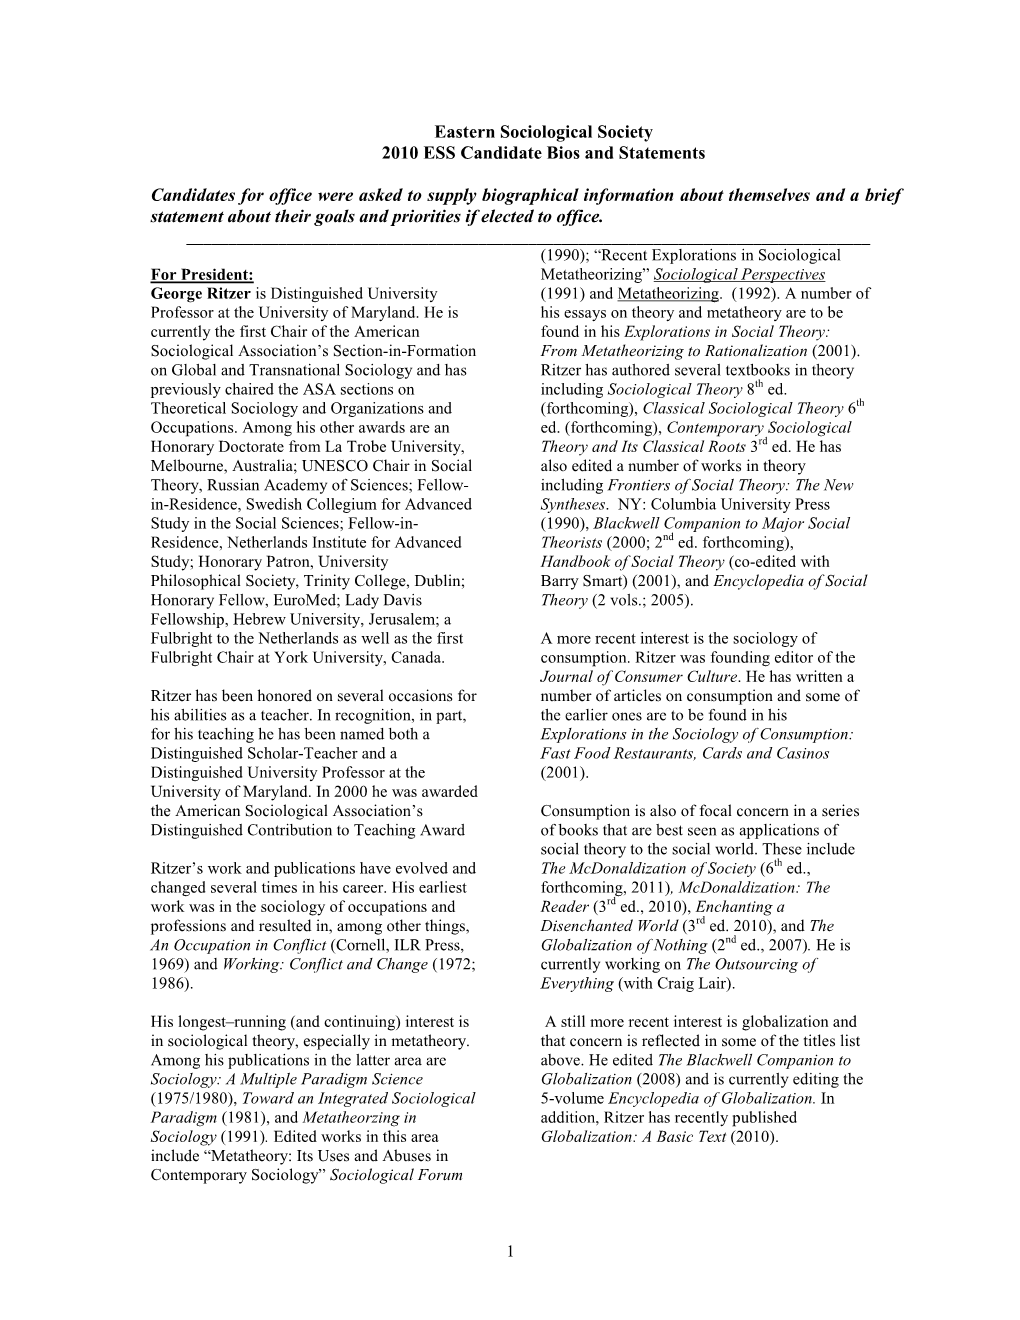 Eastern Sociological Society 2010 ESS Candidate Bios and Statements